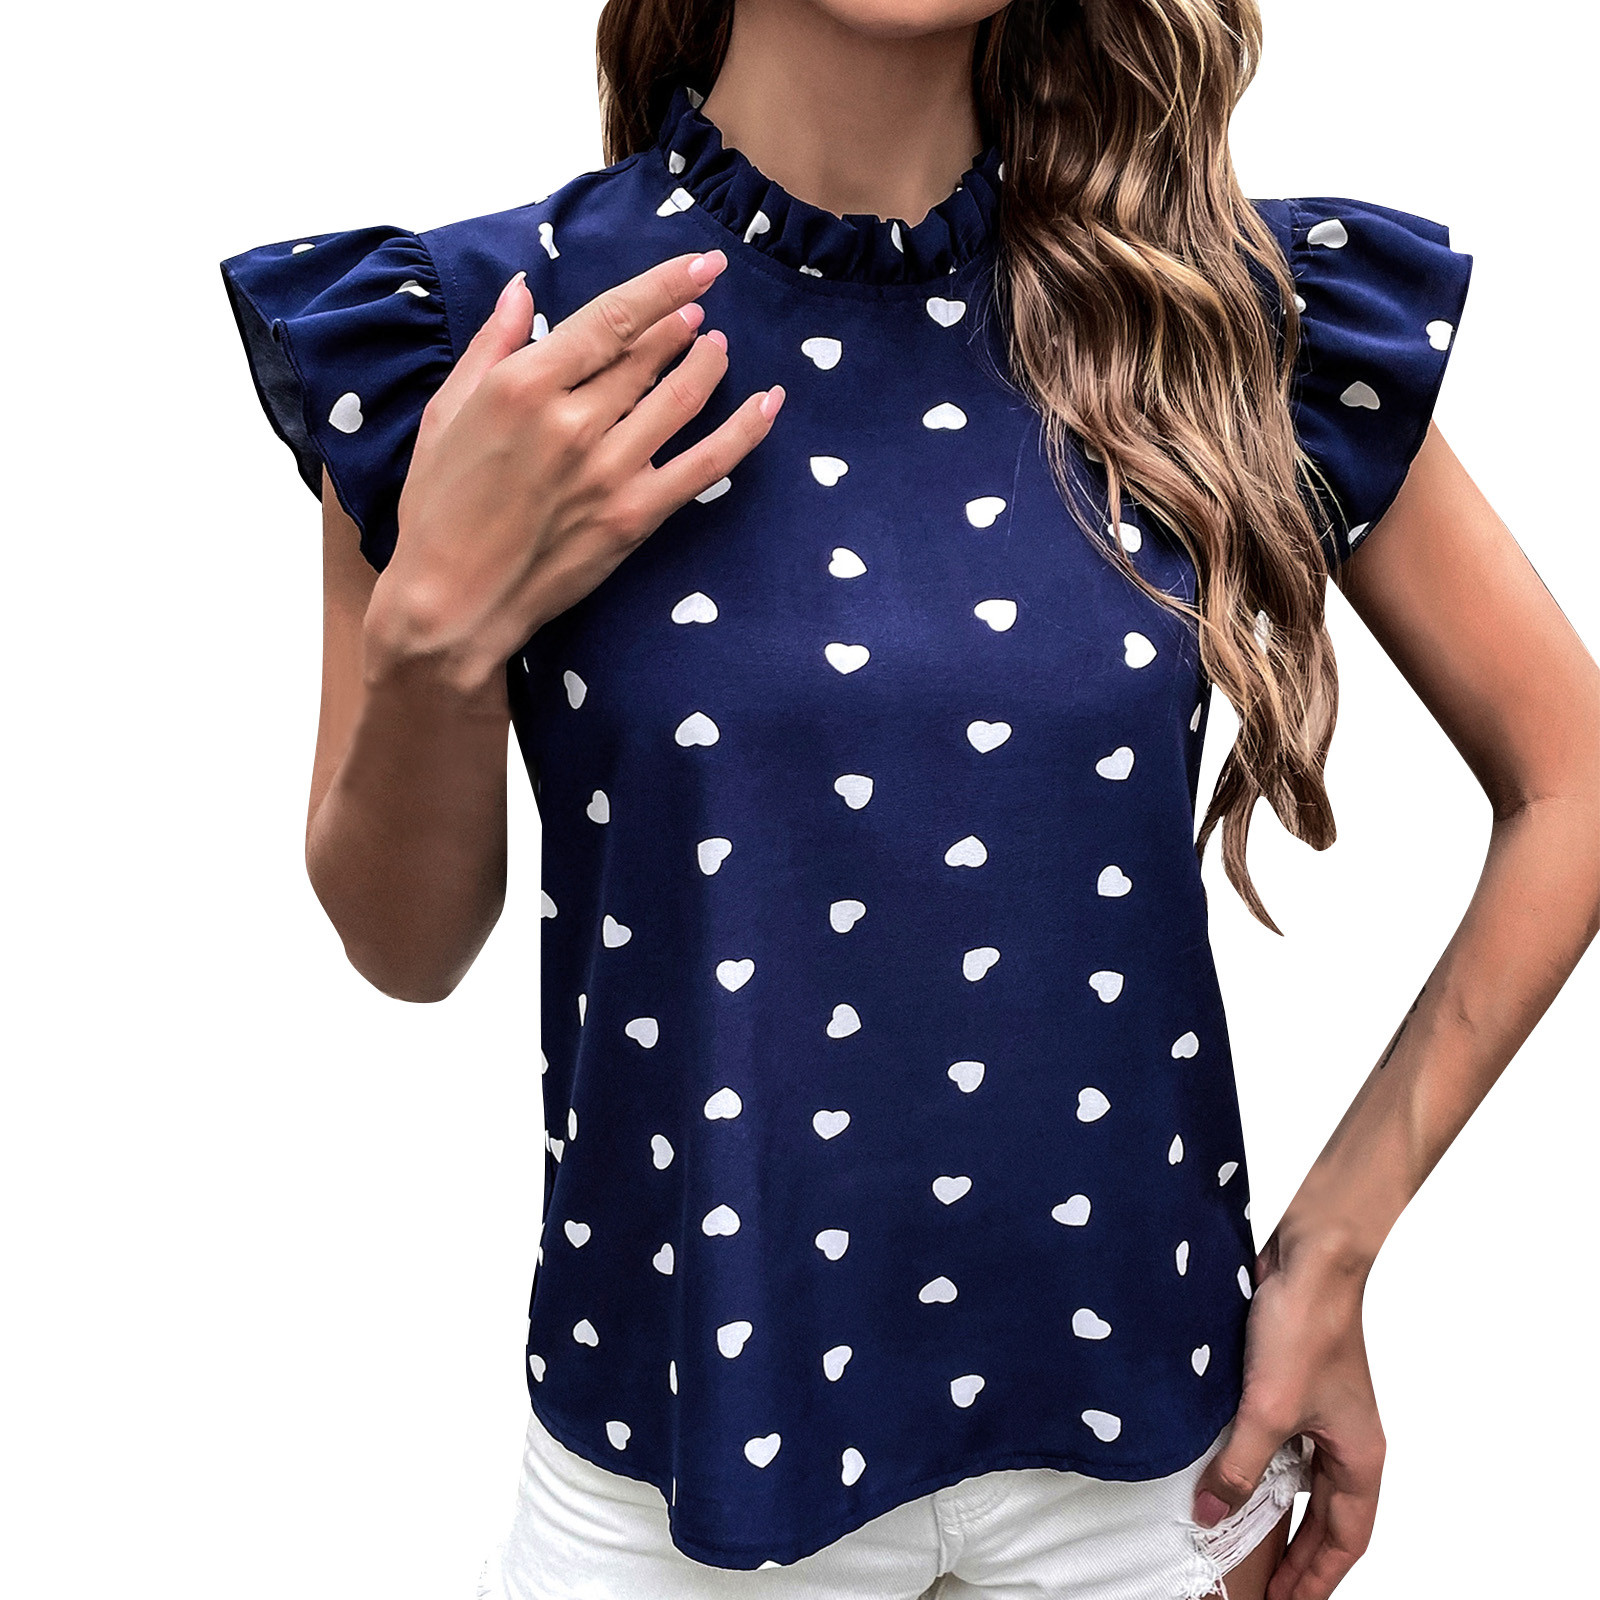 TAIAOJING Tshirt Women Summer Casual Short Sleeve Summer Pleated Polka Dot Round Neck Loose Top Fall T-Shirt - image 1 of 9